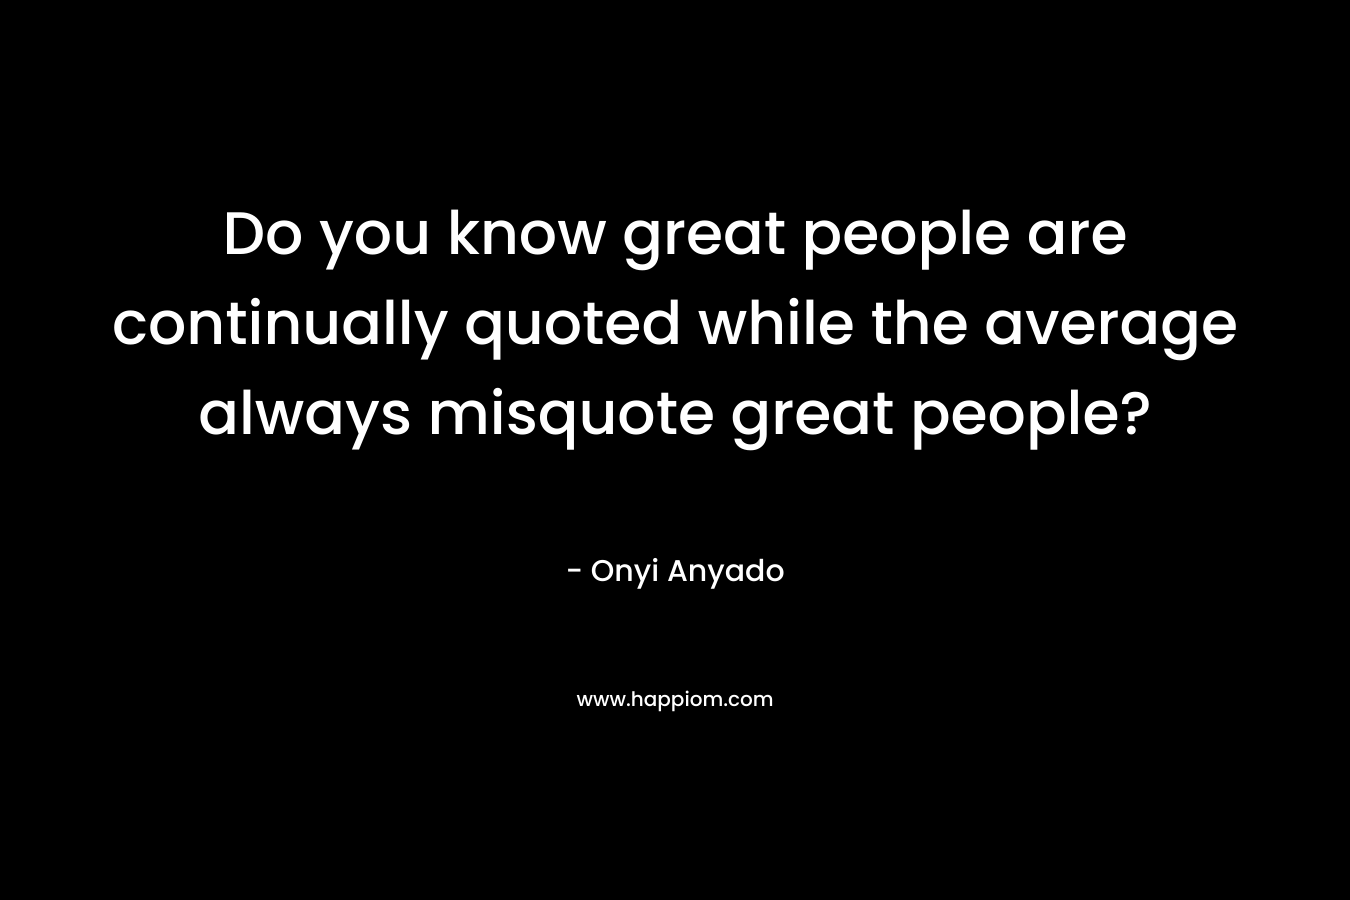 Do you know great people are continually quoted while the average always misquote great people? – Onyi Anyado